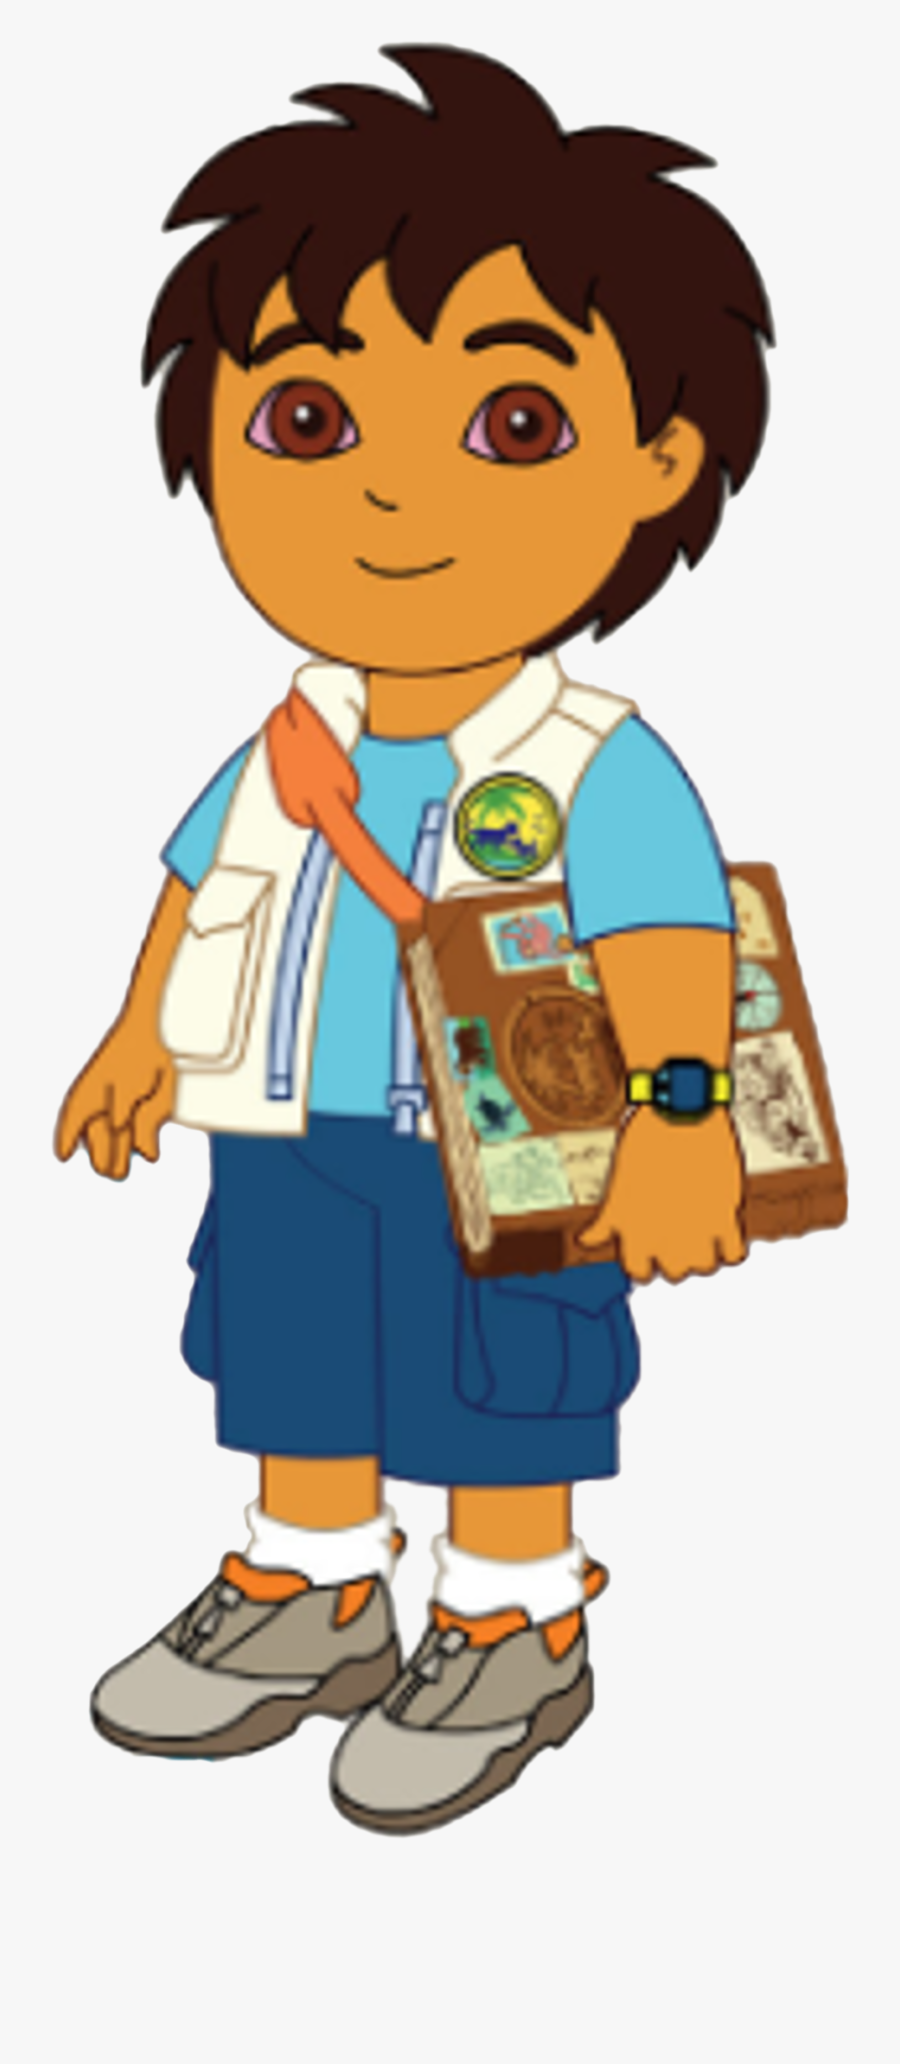 Image Diego Poses With - Dora The Explorer Diego Png Clipart, Transparent Clipart